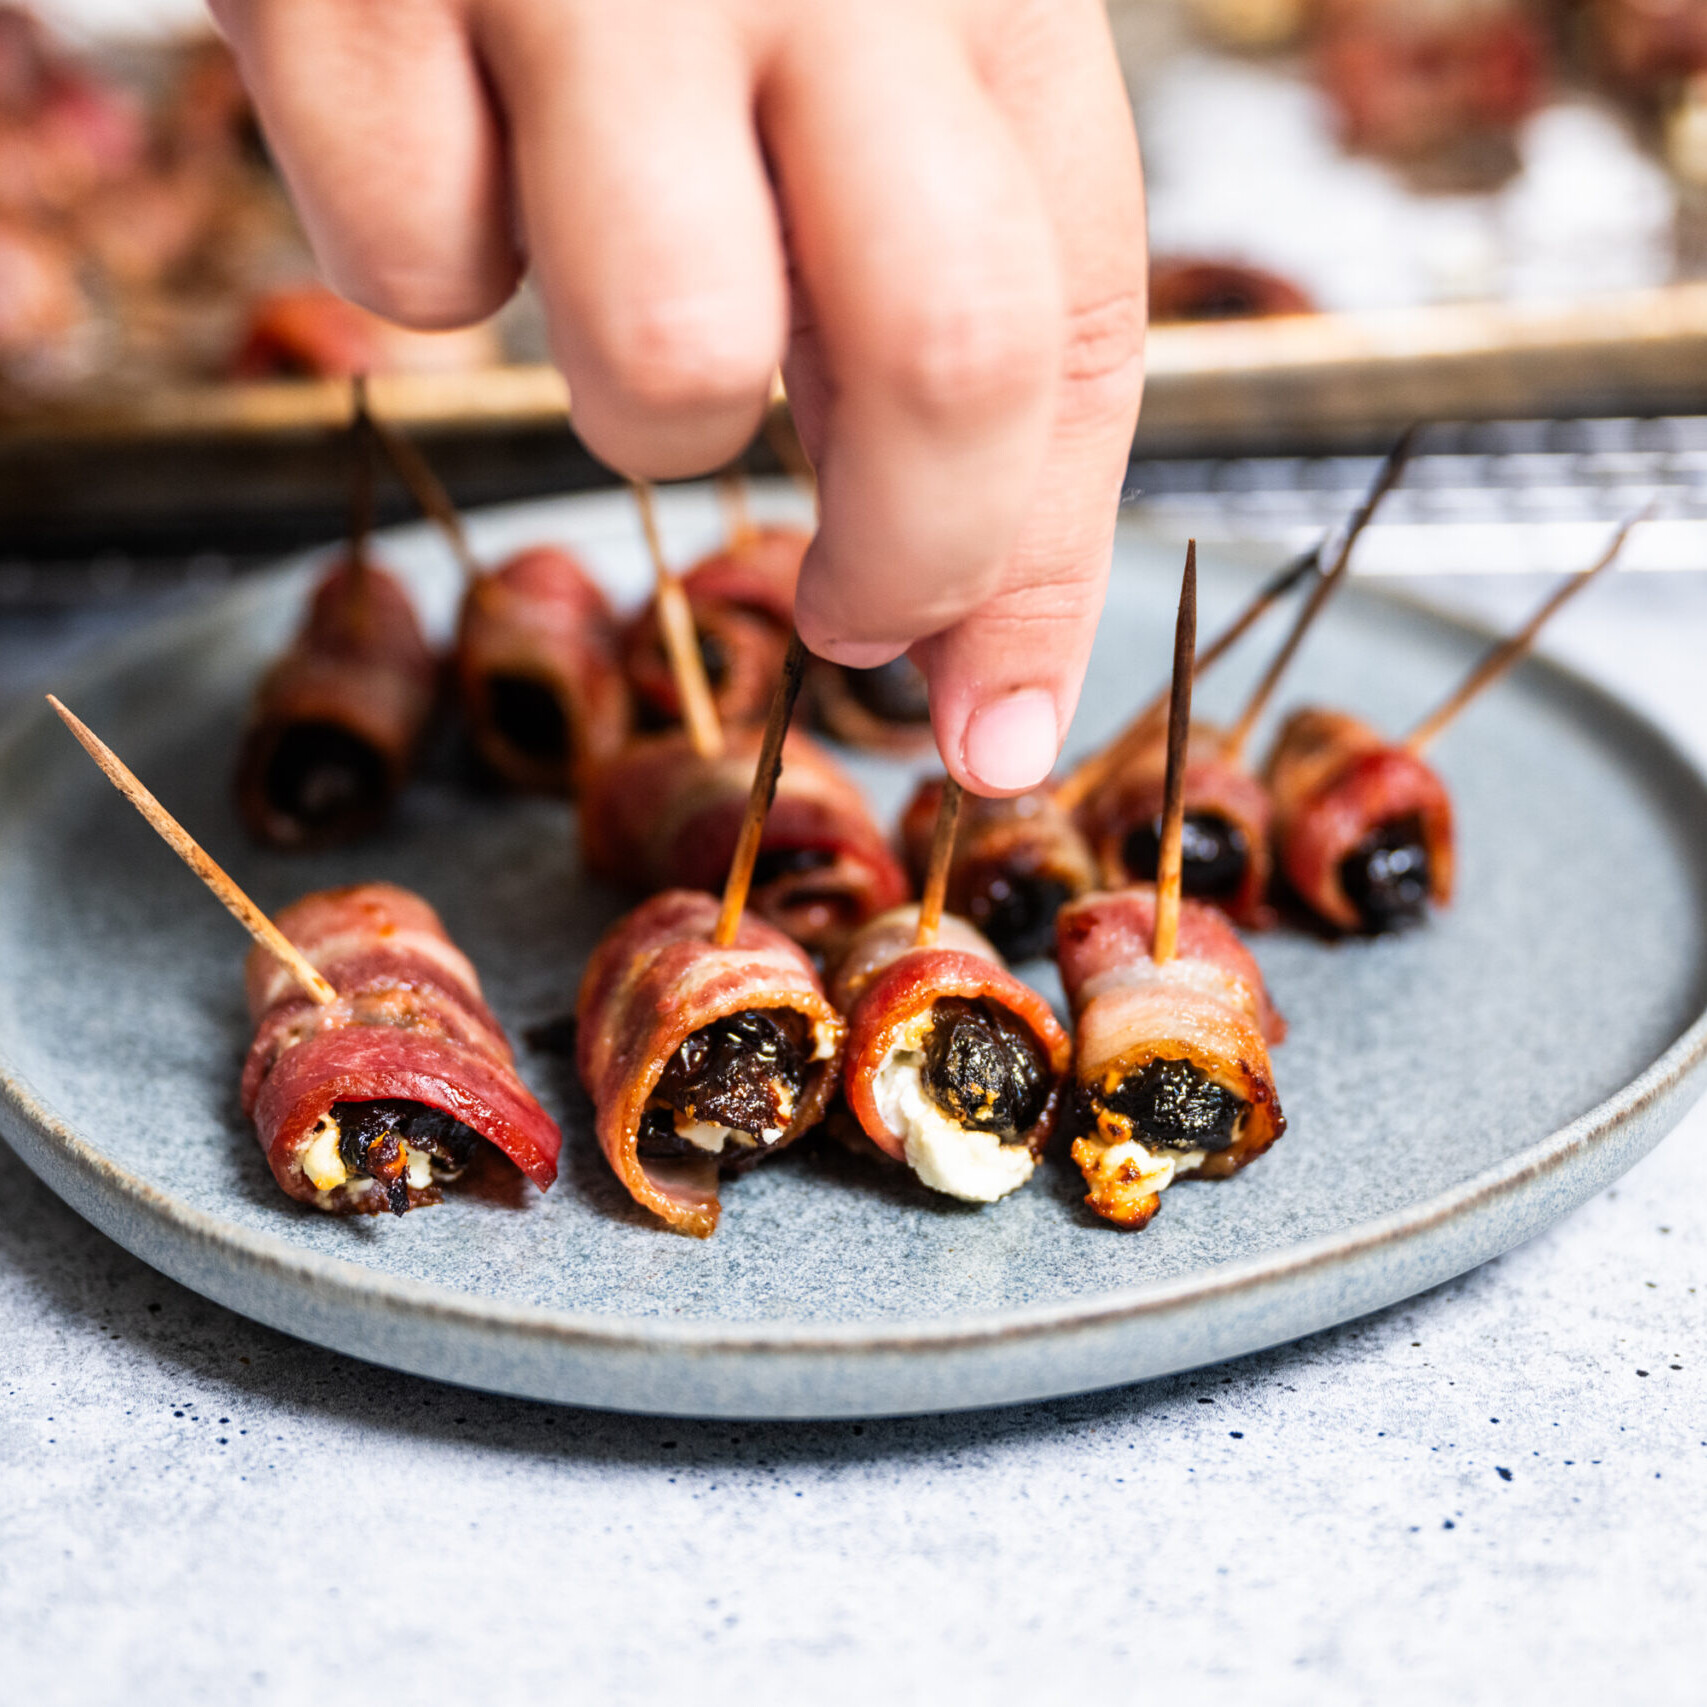 Devils on Horseback - Prunes stuffed with Goat cheese and wrapped in bacon Hand reaching to grab a bacon wrapped prune